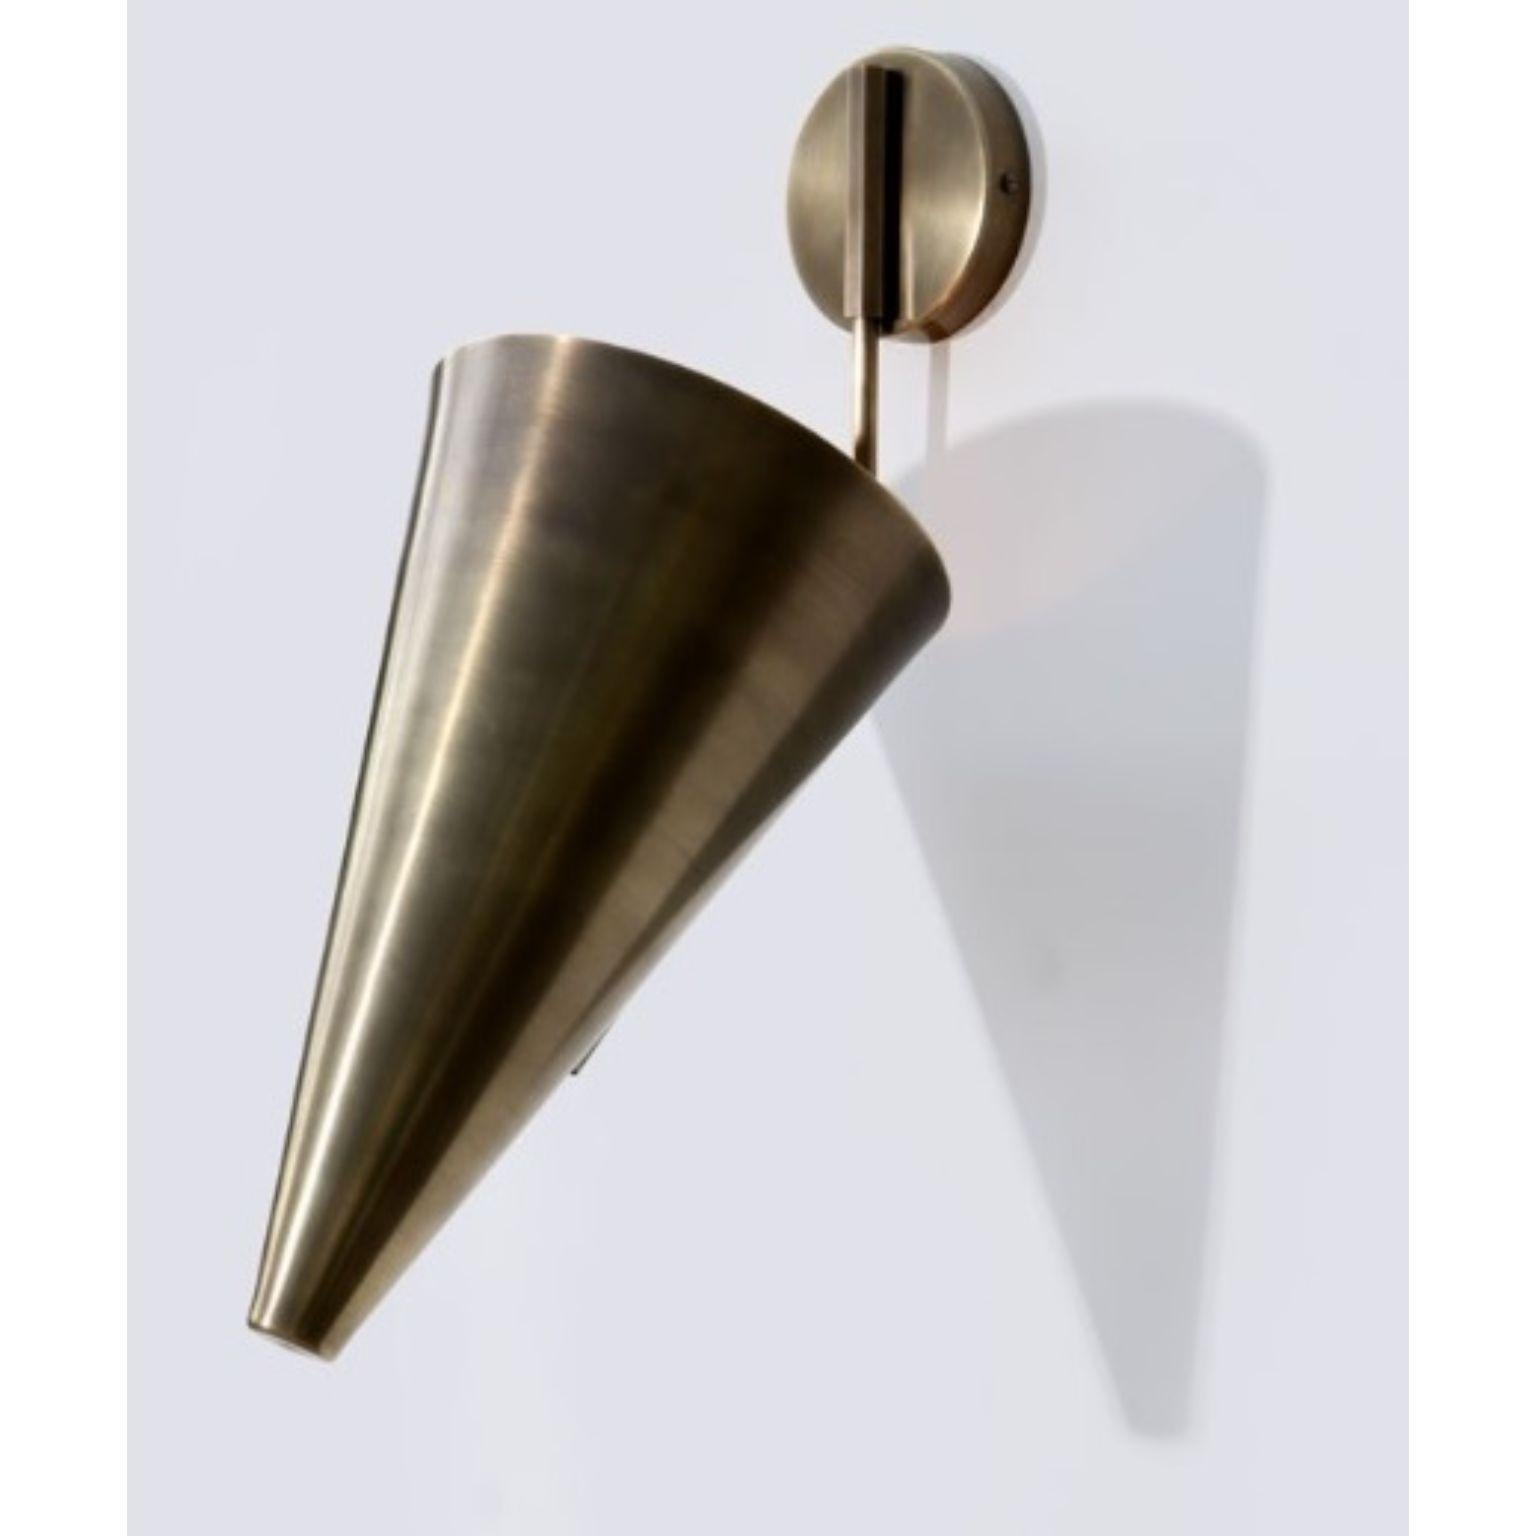 Cone Wall Sconce Two by Lamp Shaper
Dimensions: D 19 x W 30.5 x H 31 cm.
Materials: Brass.

Different finishes available: raw brass, aged brass, burnt brass and brushed brass Please contact us.

All our lamps can be wired according to each country.